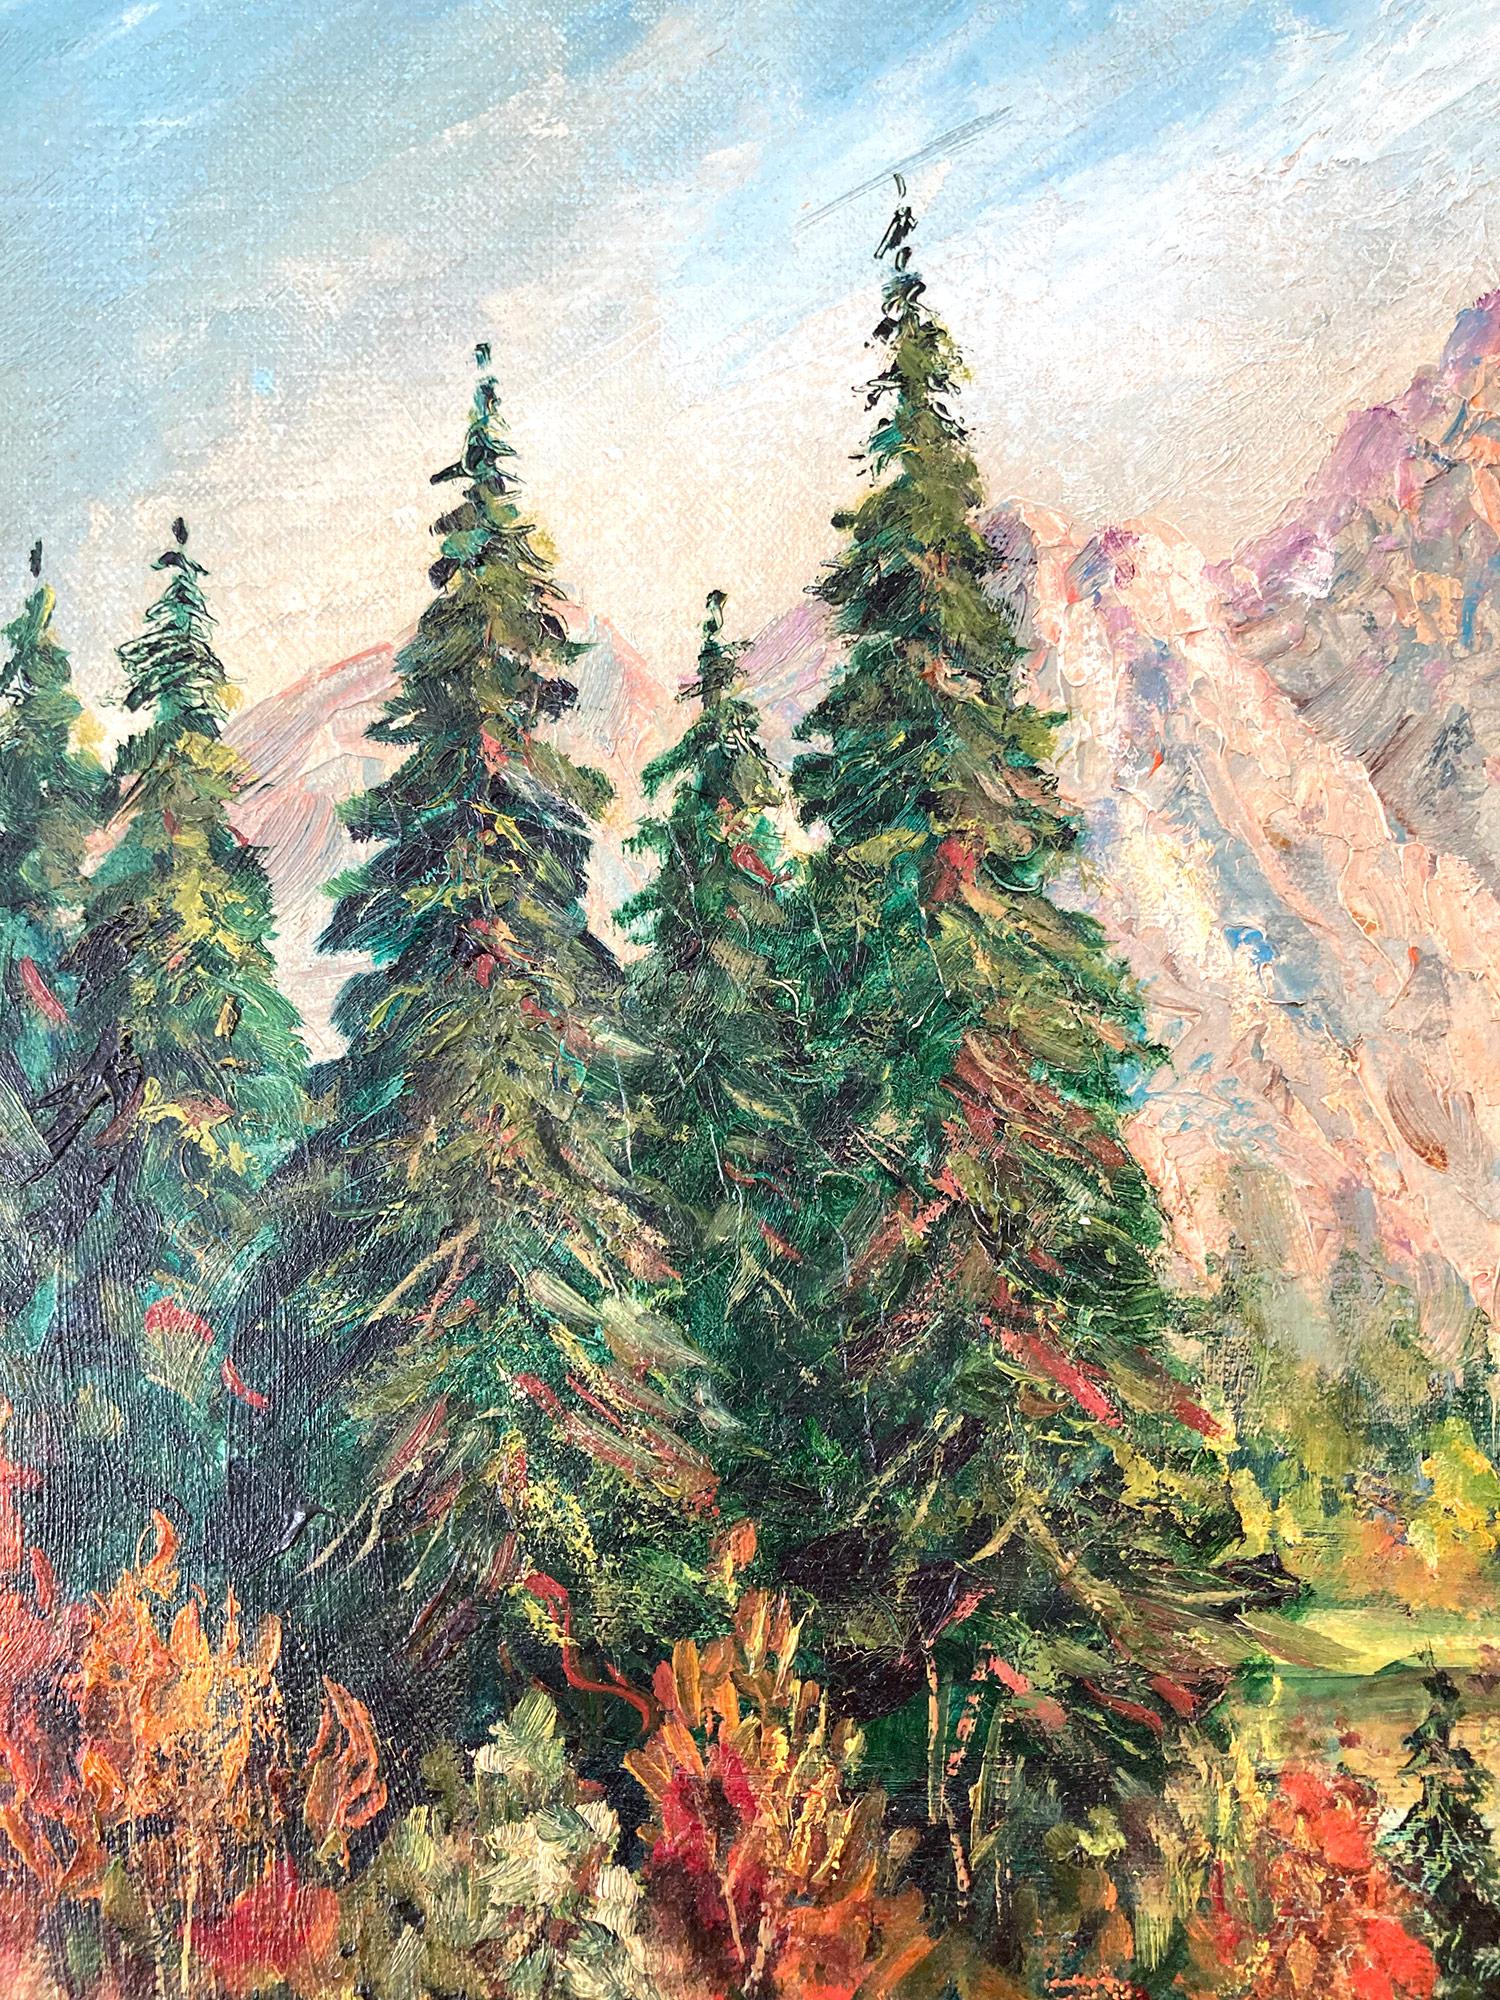 A wonderful depiction of mountain lake landscape in the country side. For this beautiful depiction of the mountains, we find distinct elements that are unique to the earlier works of Marie Berger. Among other things, Marie Berger's art is notable